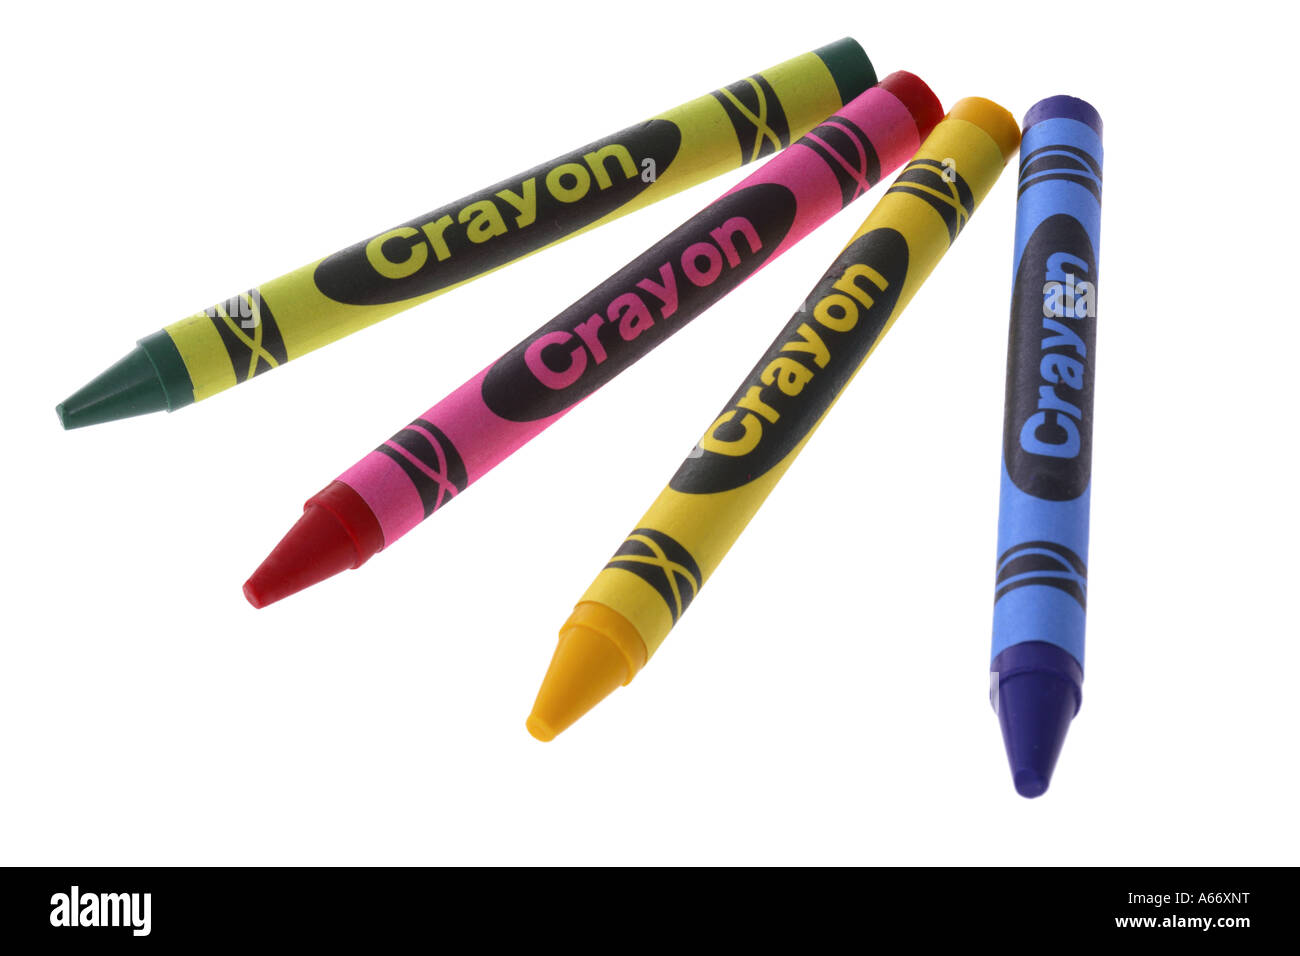 Crayons cut out on white background Stock Photo